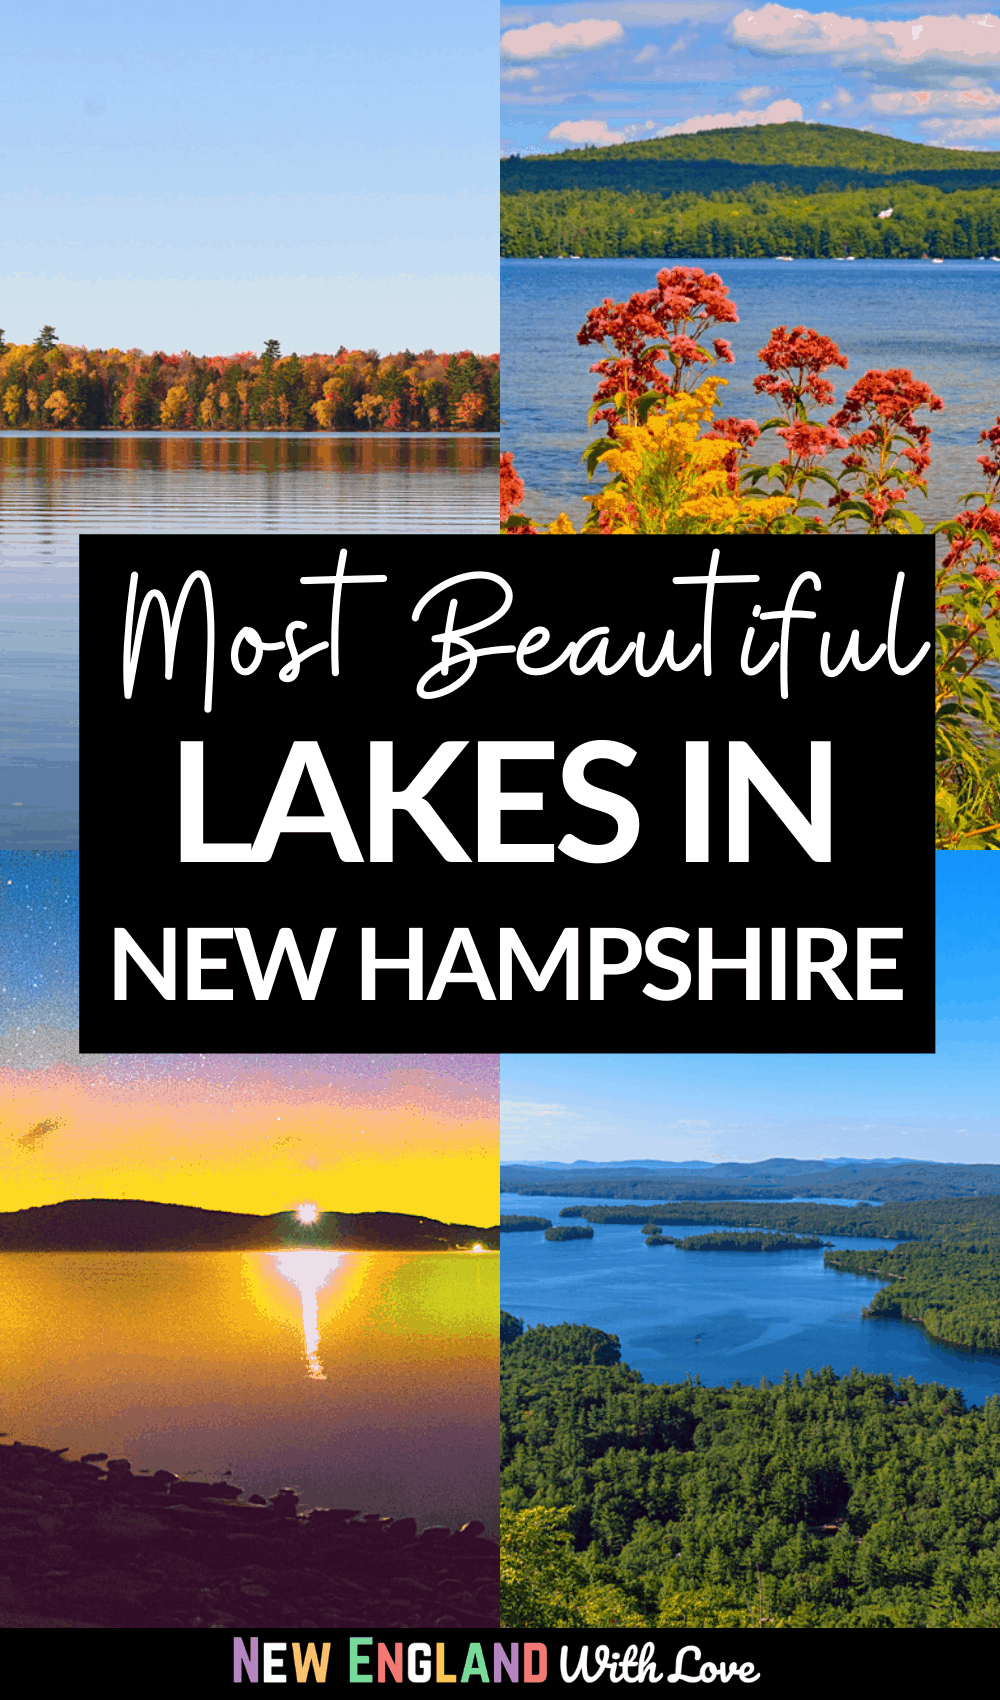 Pinterest graphic reading "Most Beautiful LAKES IN NEW HAMPSHIRE"